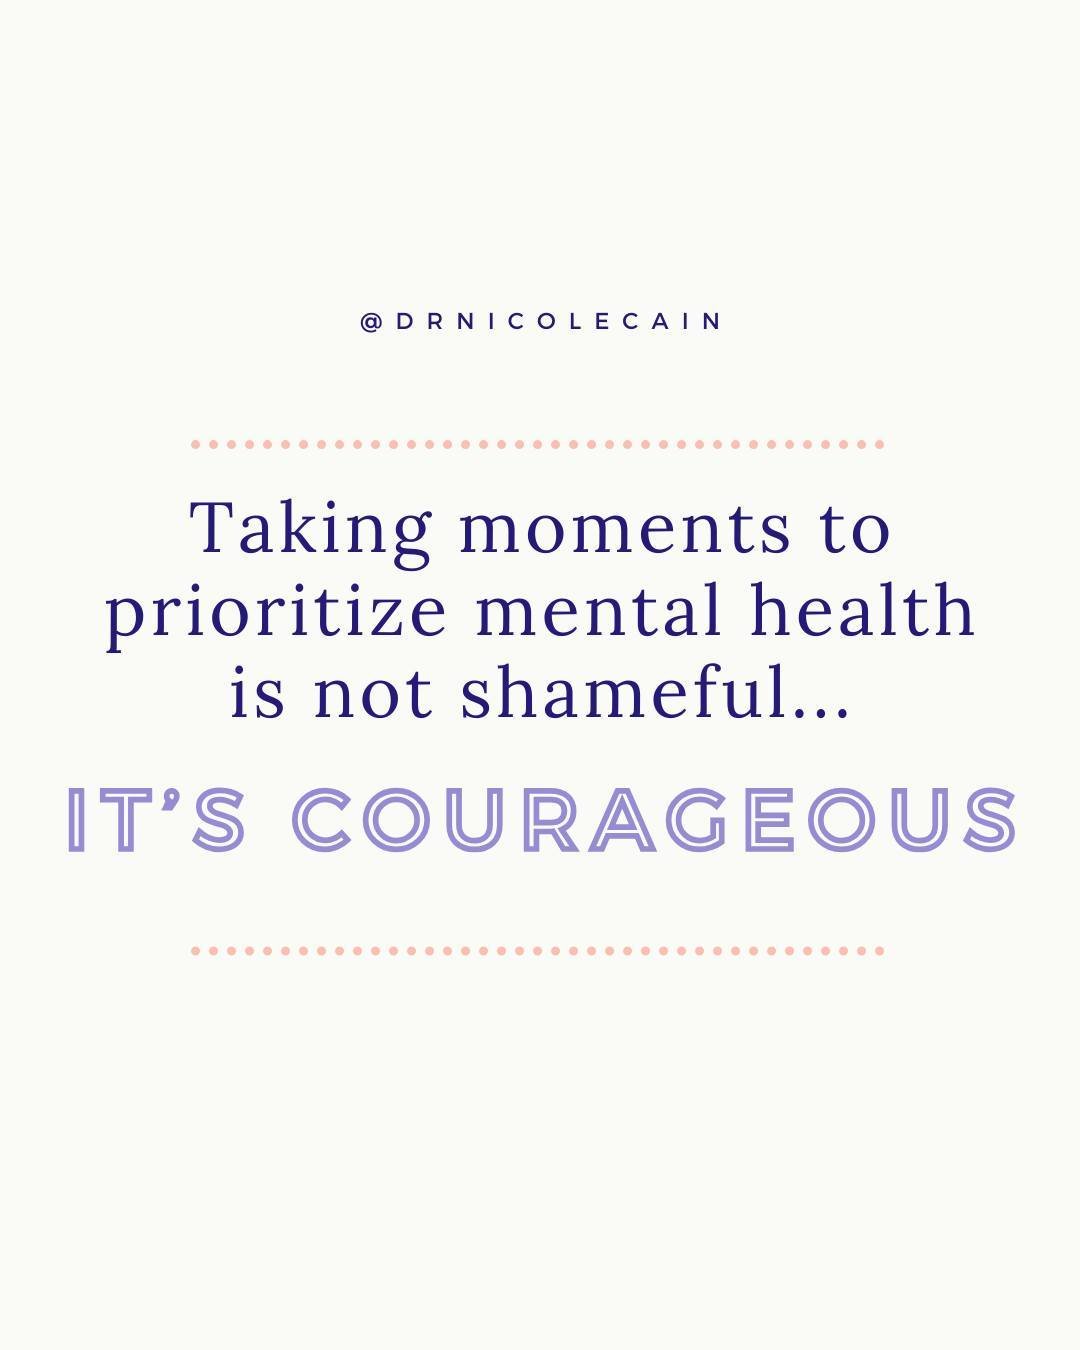 May is mental health awareness month 

💜Join me and NAMI this month in normalizing the practice of taking moments to prioritize mental health care without guilt or shame.

Our mental health journey starts with a single moment. Take it for yourself. 